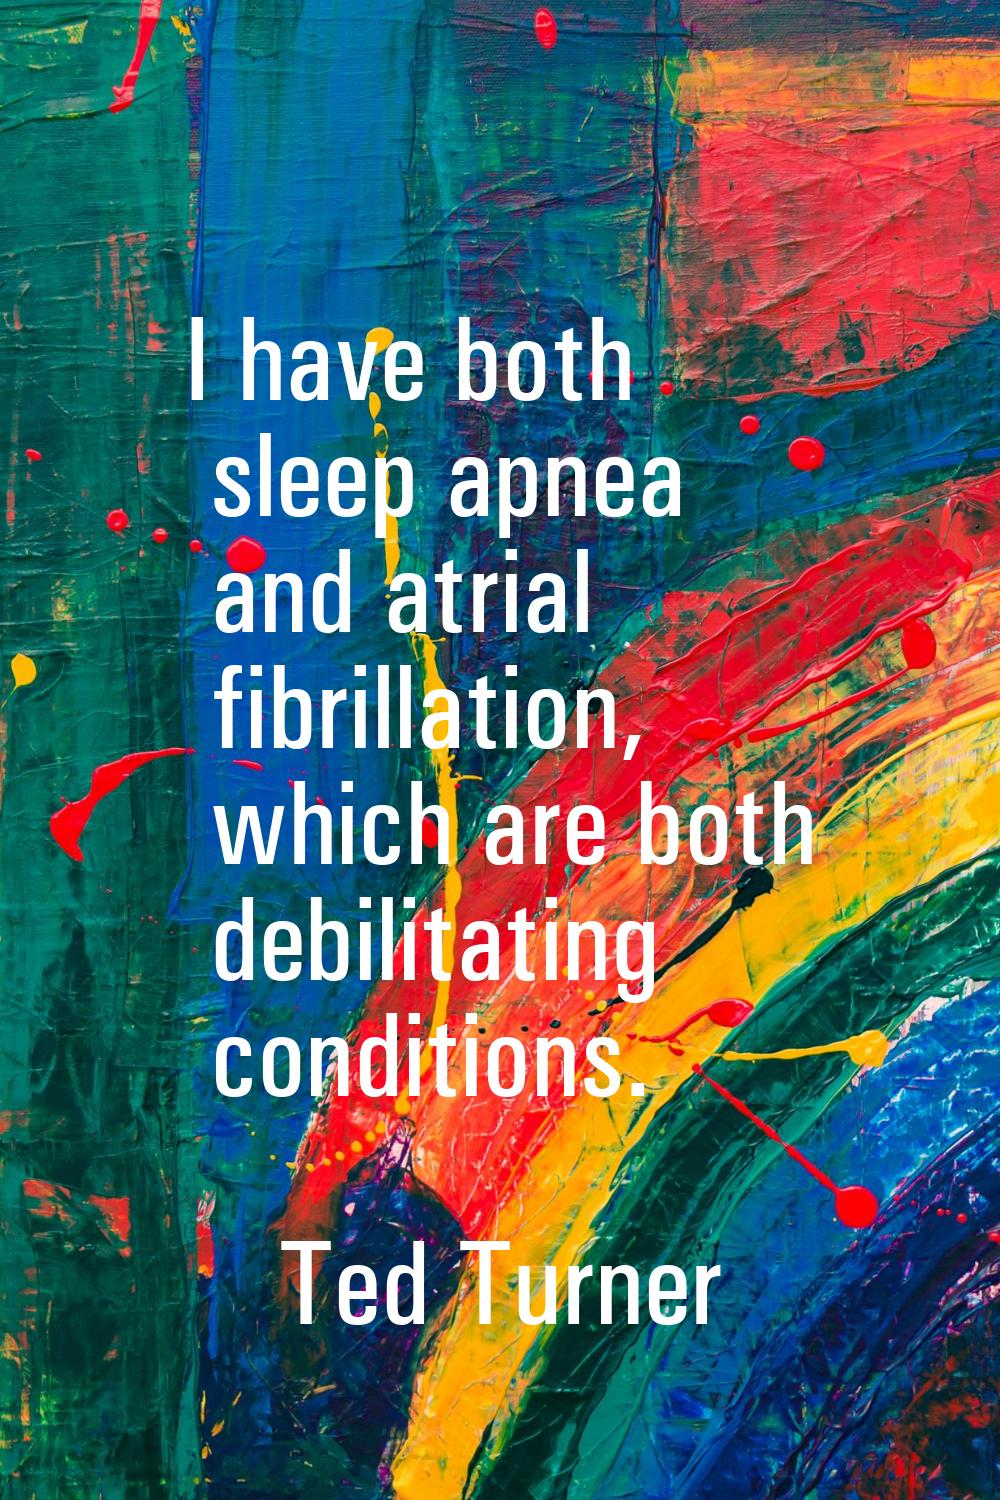 I have both sleep apnea and atrial fibrillation, which are both debilitating conditions.